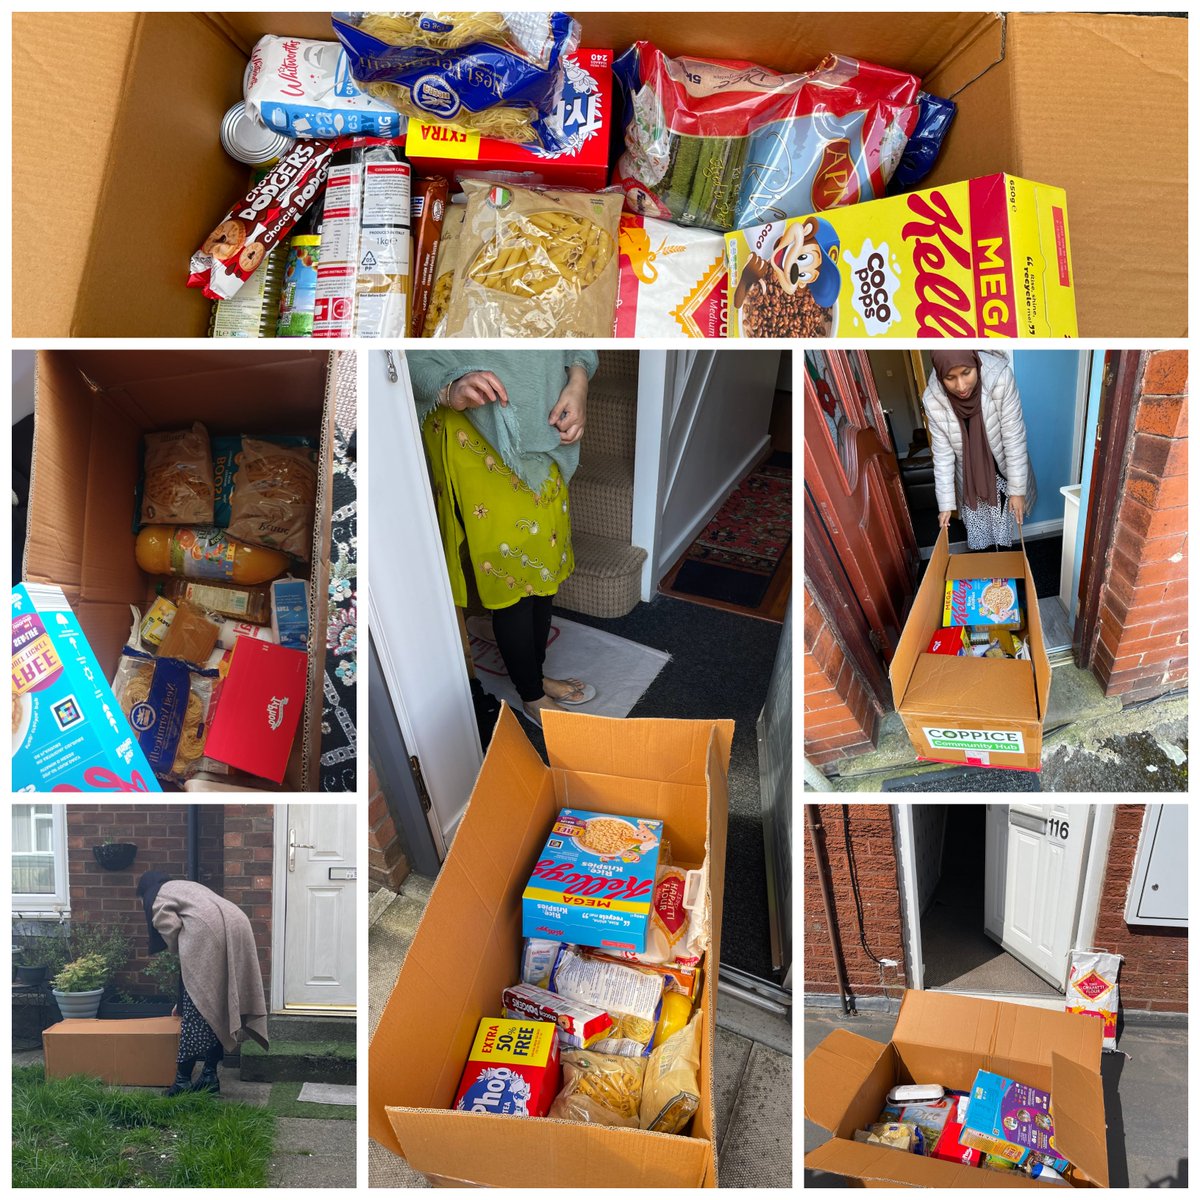 Food parcels delivered to some service users with the help of volunteers. Thanks to @CoppiceHub for the food packs. @BameConnect @WeActTogether @OldhamCouncil